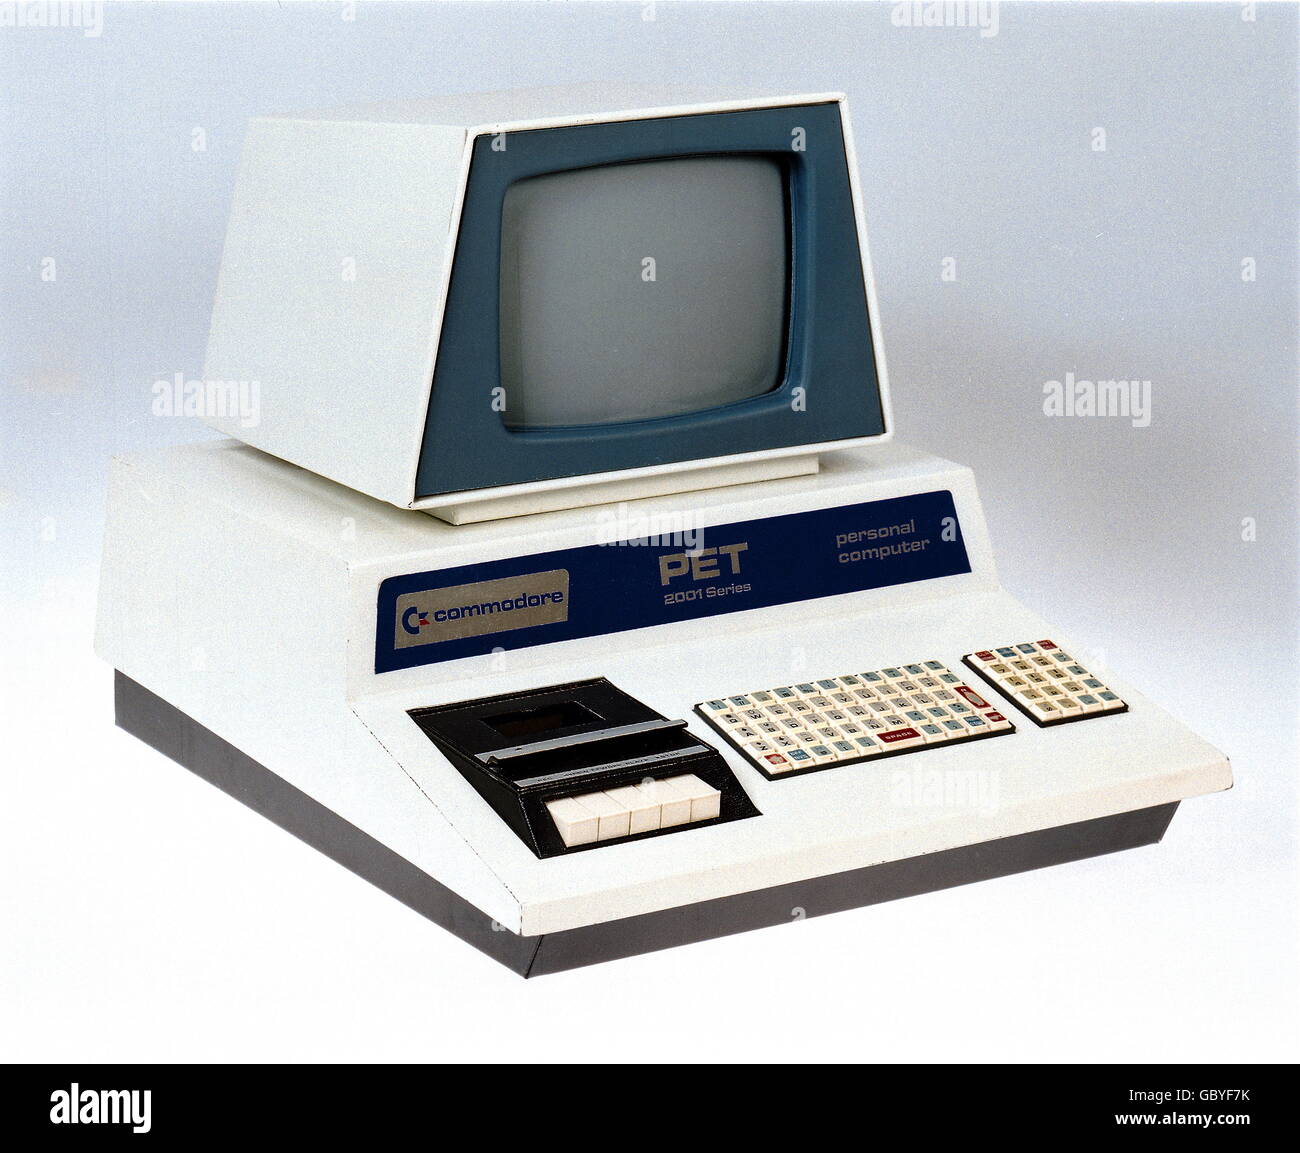 computing / electronics, computer, Commodore PET 2001, USA, 1977, historic, historical, 1970s, 70s, 20th century, compact, personal computer, computers, technic, technics, integrated datasette, mass storage, memory, processor, processors 6502, keyboard, personal, home computer, invention, PC, Personal Electronic Transactor, display, hardware, studio shot, Additional-Rights-Clearences-Not Available Stock Photo